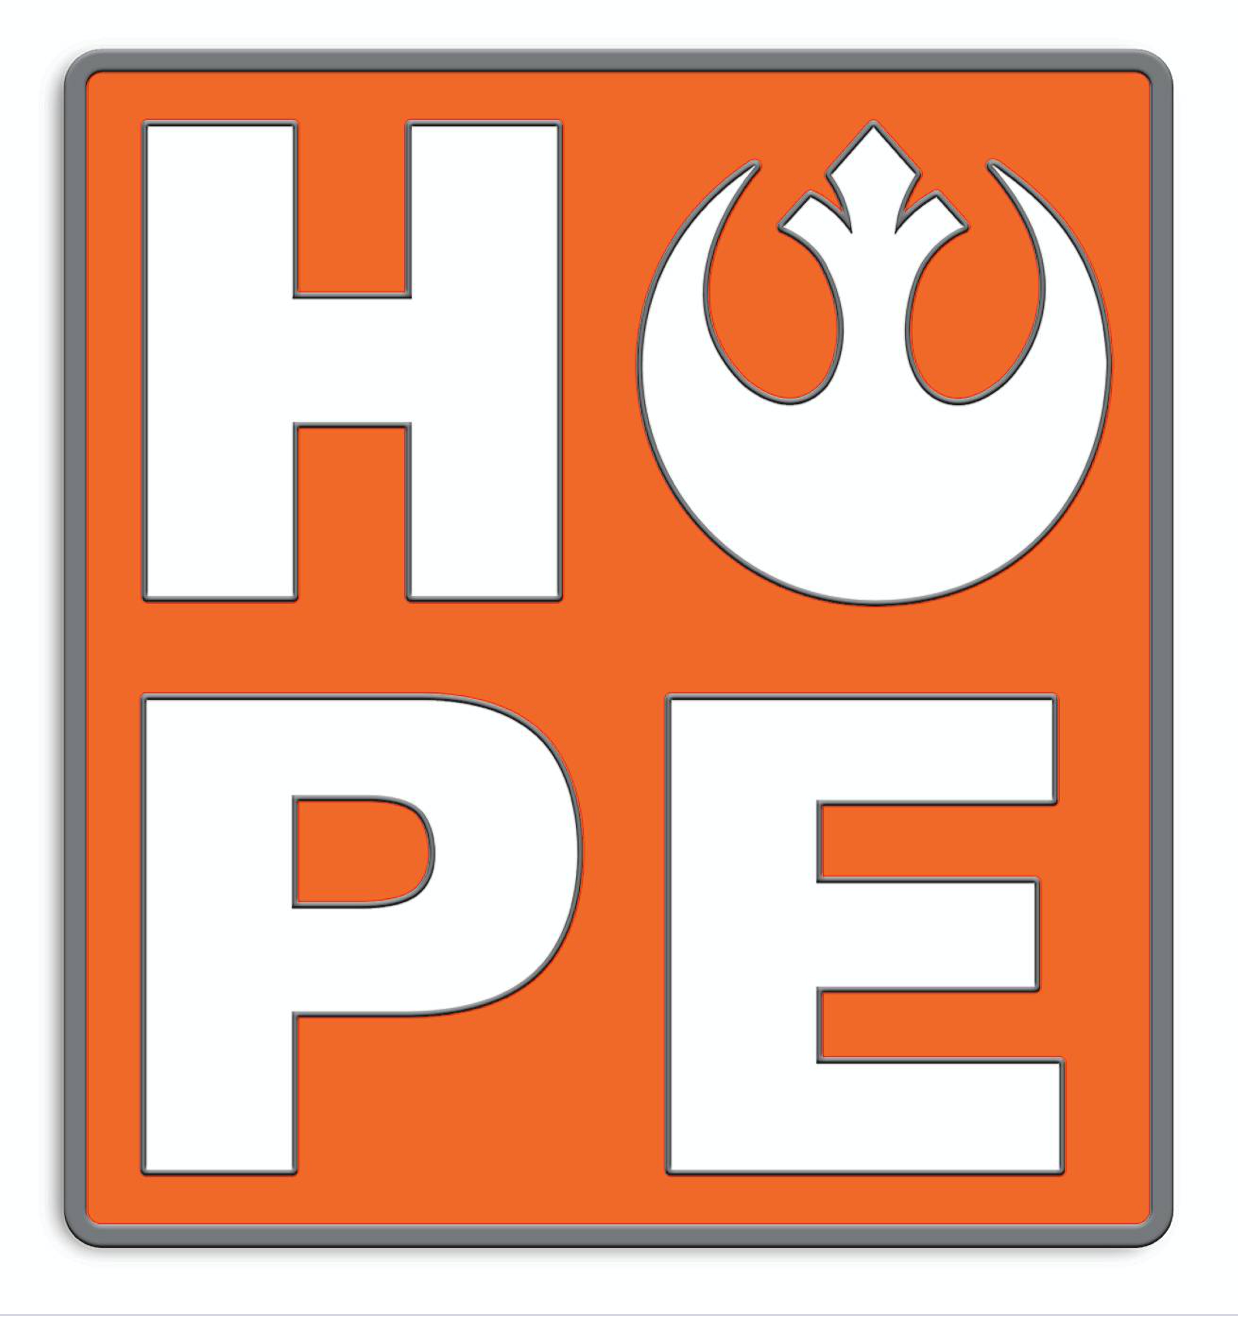 Disney Parks Rebel Alliance HOPE Her Universe Limited Release Pin New with Card